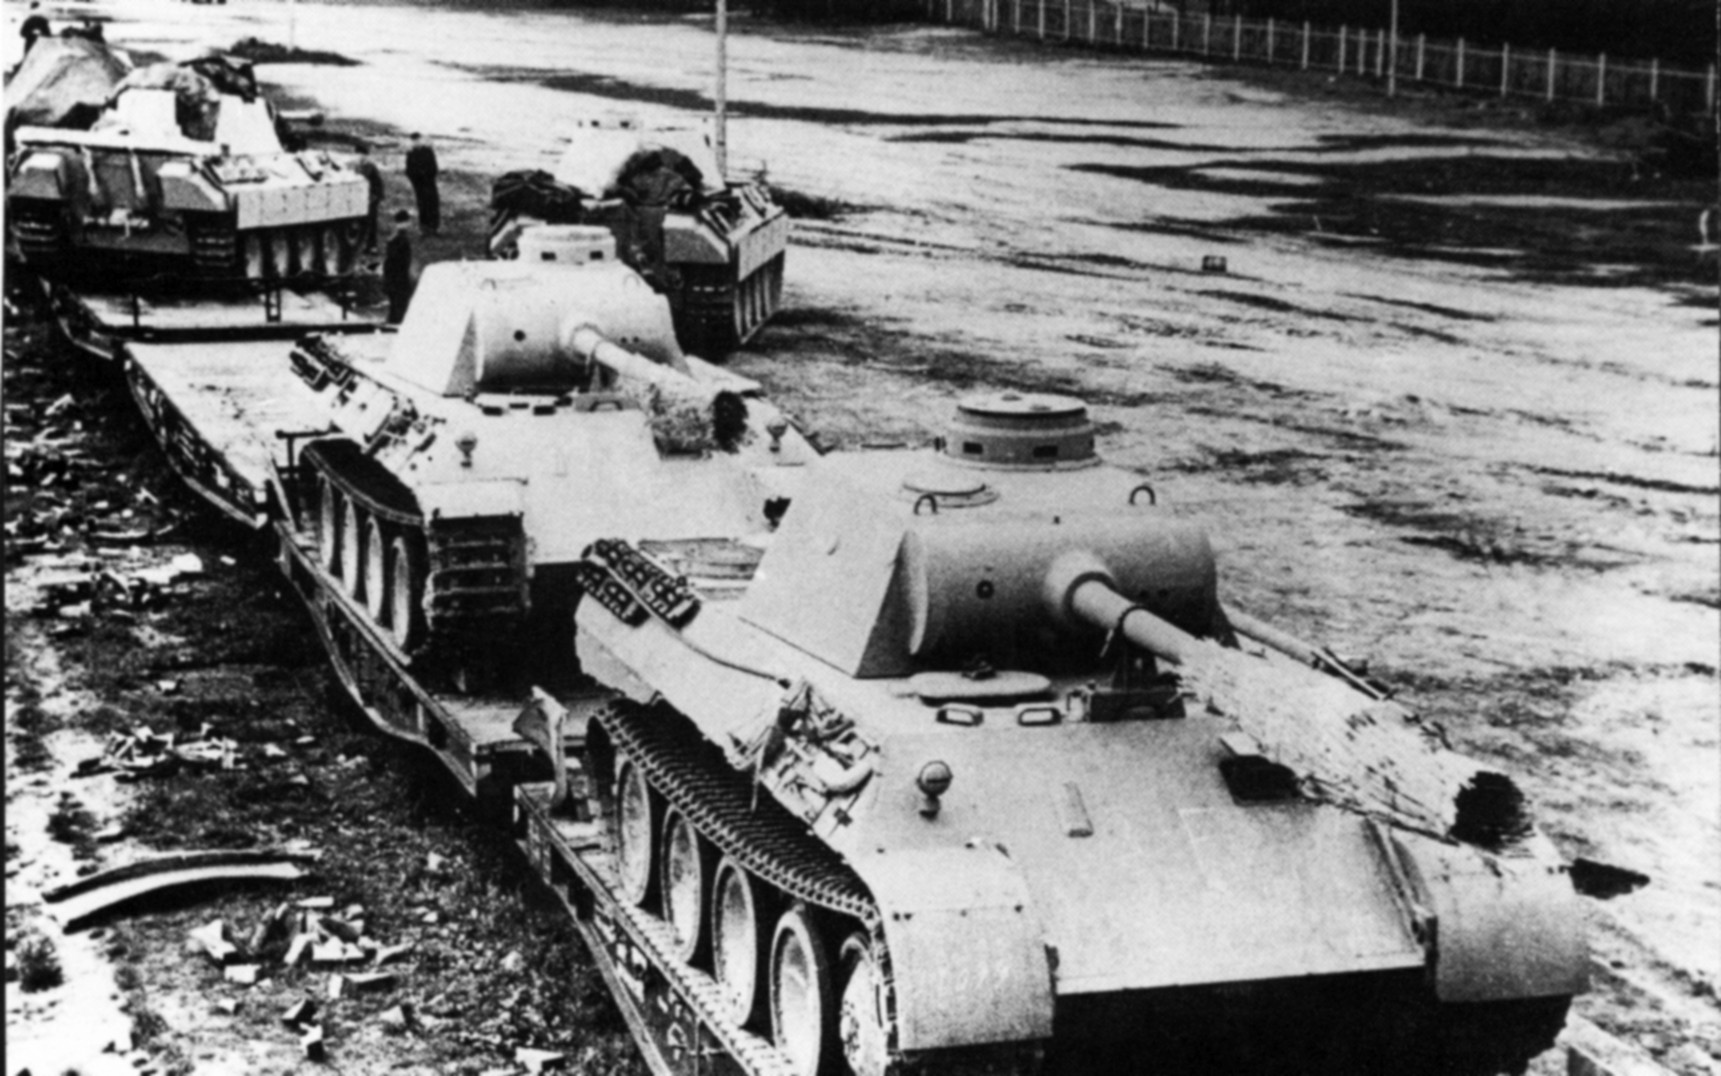 The Mark V Panther medium tank was the German response to the outstanding performance of the Red Army’s T-34. The Panther sported sloped hull armor and a 75mm high velocity cannon.